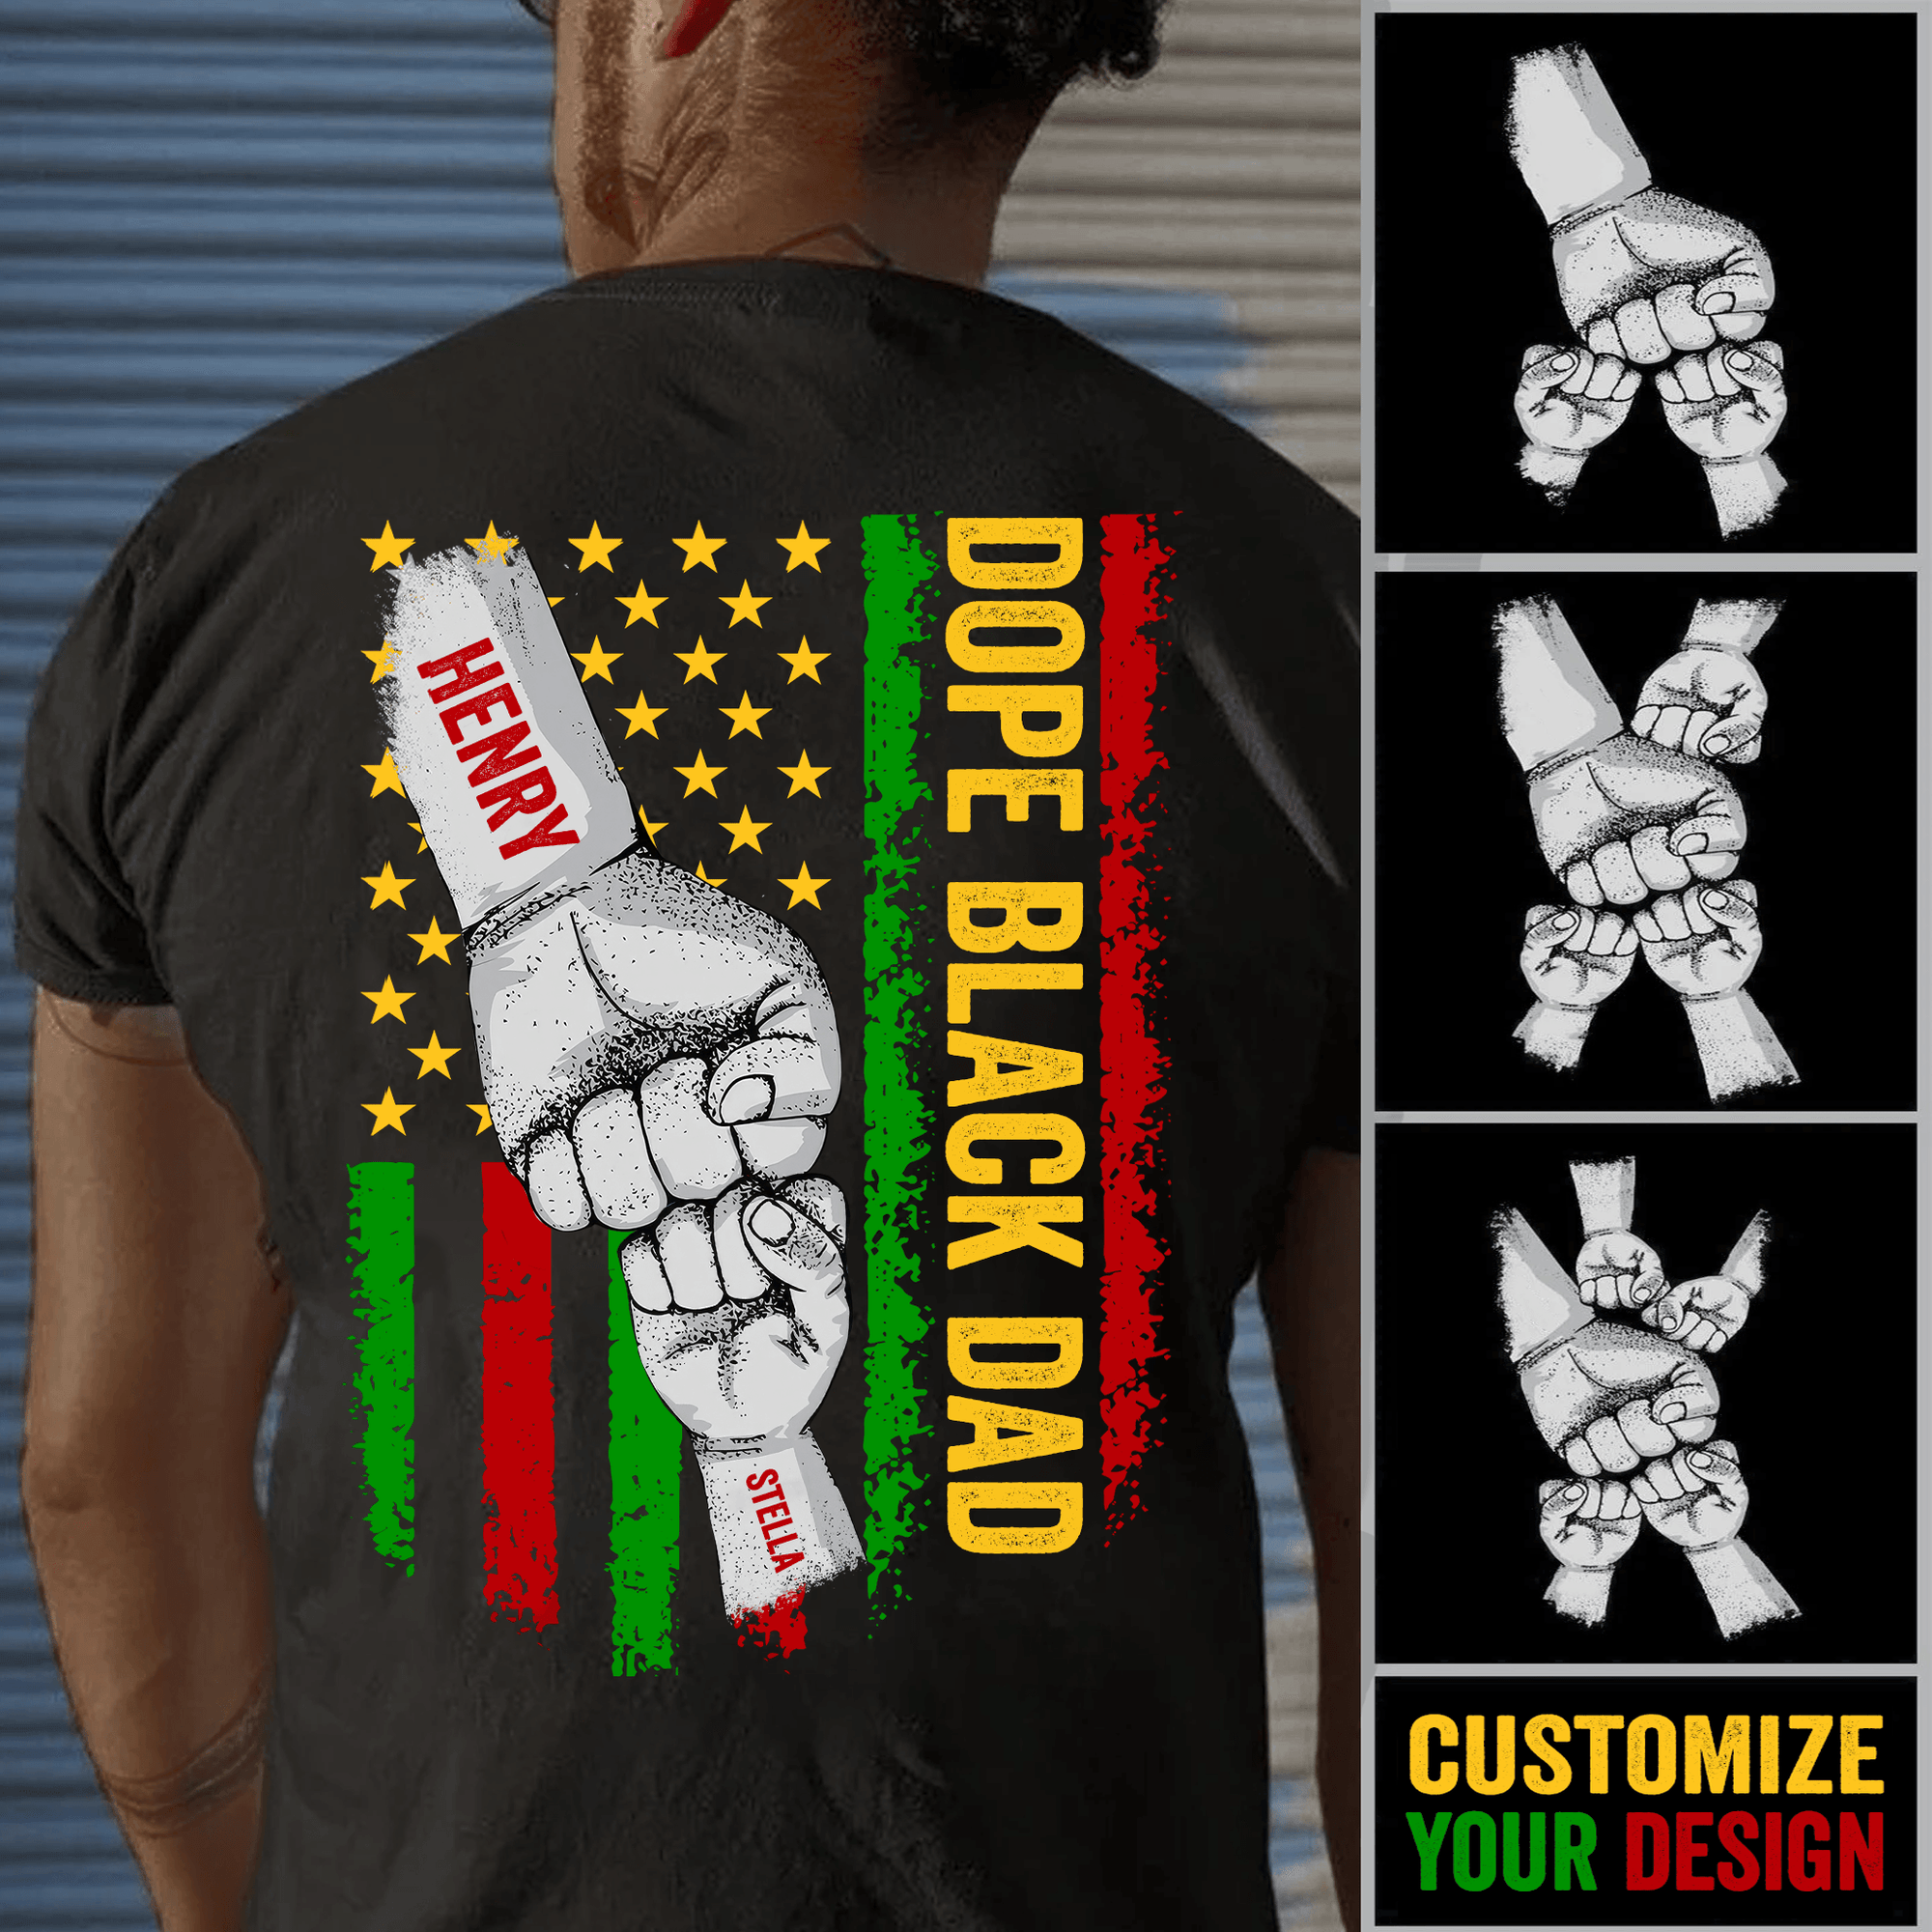 Dope Black Dad, African American Dad Raised Fist Bump - Personalized Custom Back Printed T Shirt - Celebrate Juneteenth, Father's Day Gift for Black King, Grandpa, Daddy, Dada, Dad Jokes - Suzitee Store